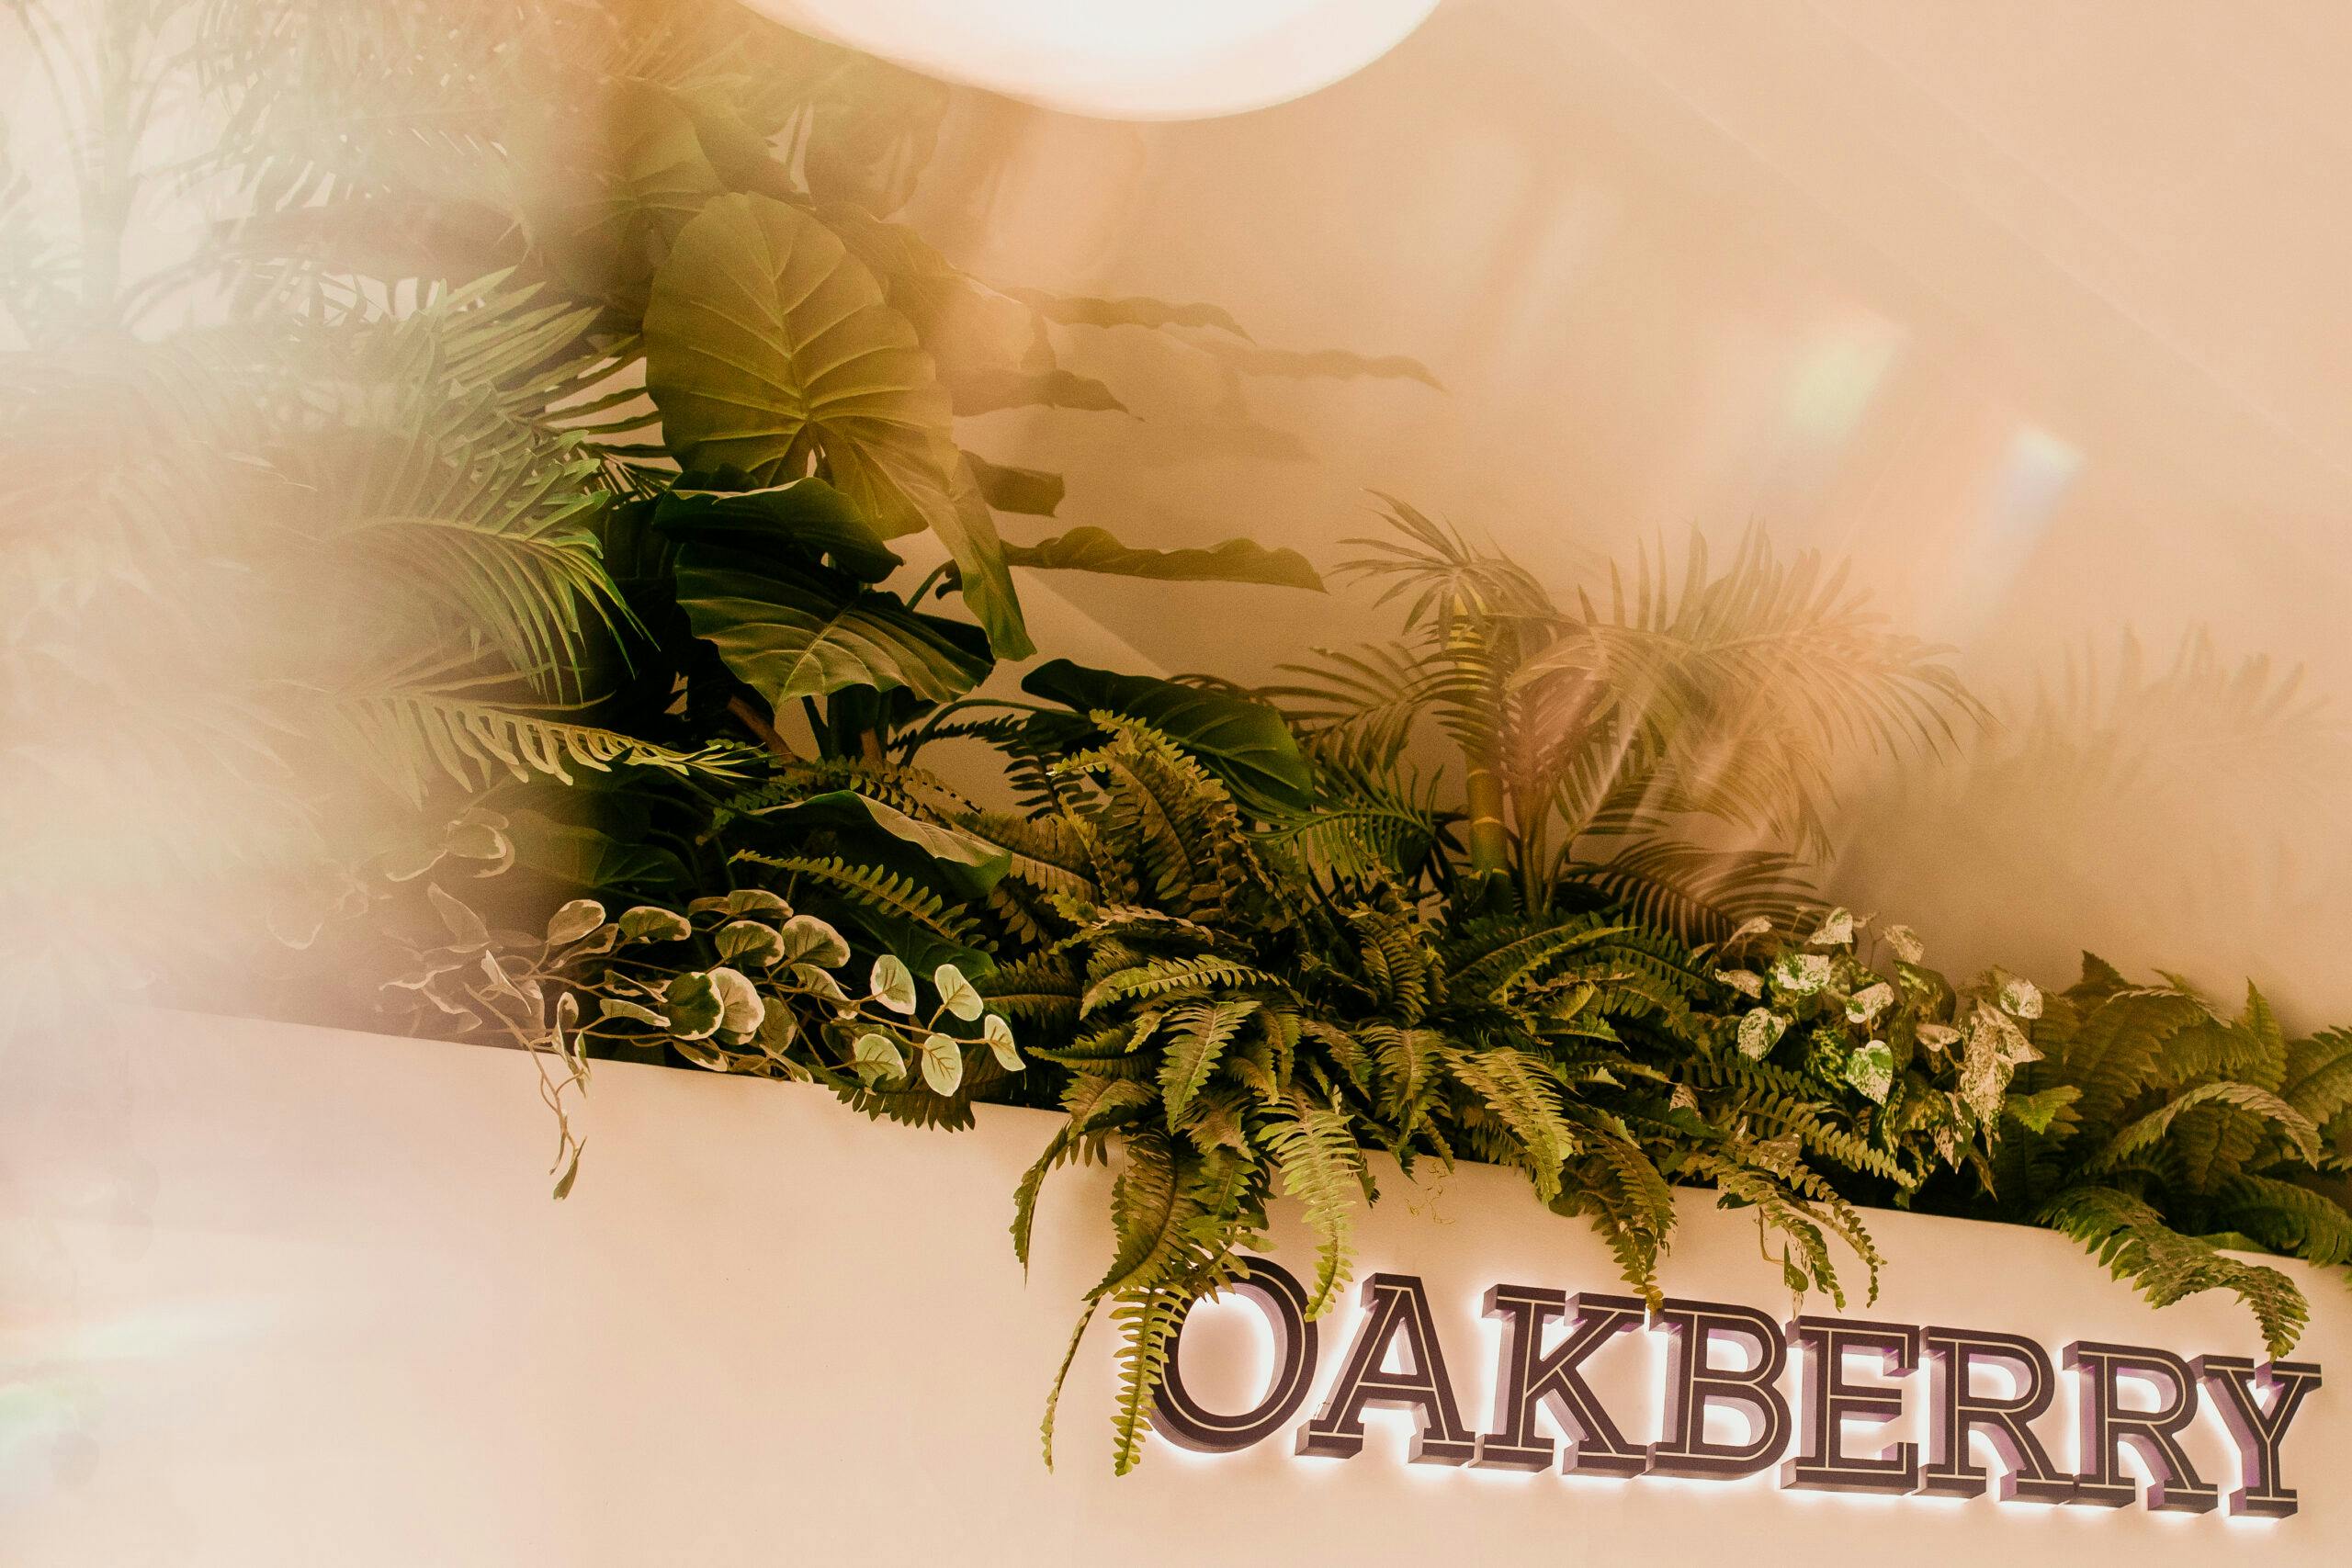 An OAKBERRY sign with plants on it